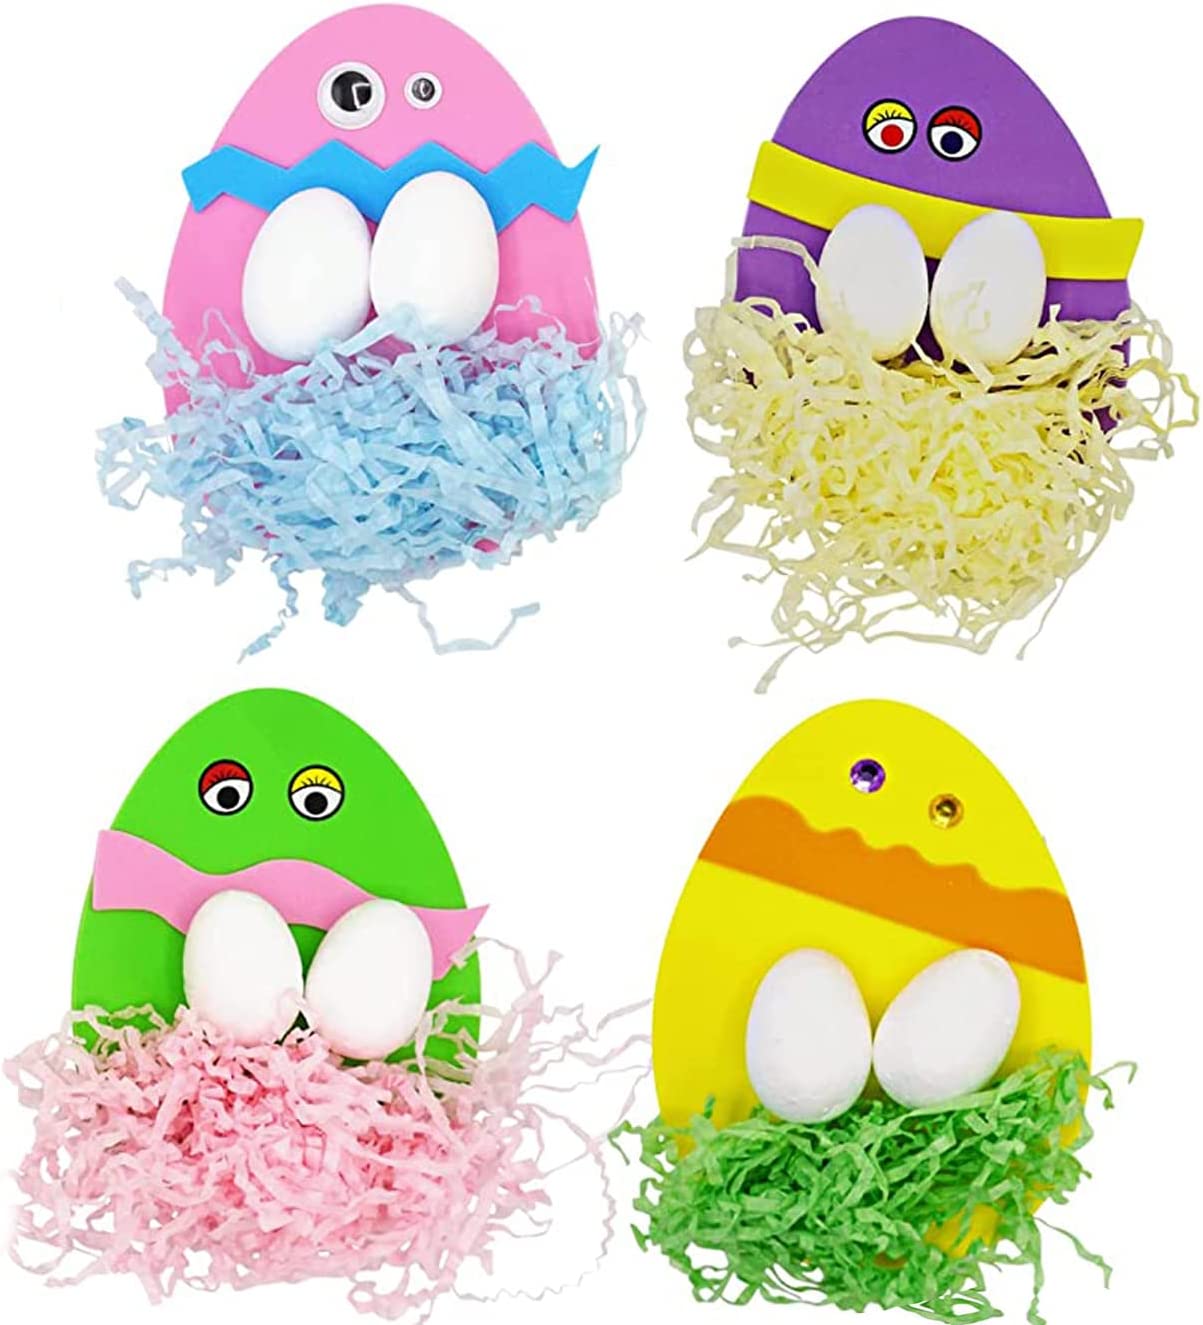 259 Pcs+ Easter Egg Craft Bulk - 3D Magnet Easter Crafts for Kids (Individually Wrapped) for Spring Home DIY Activity Makes 12 by 4E's Novelty